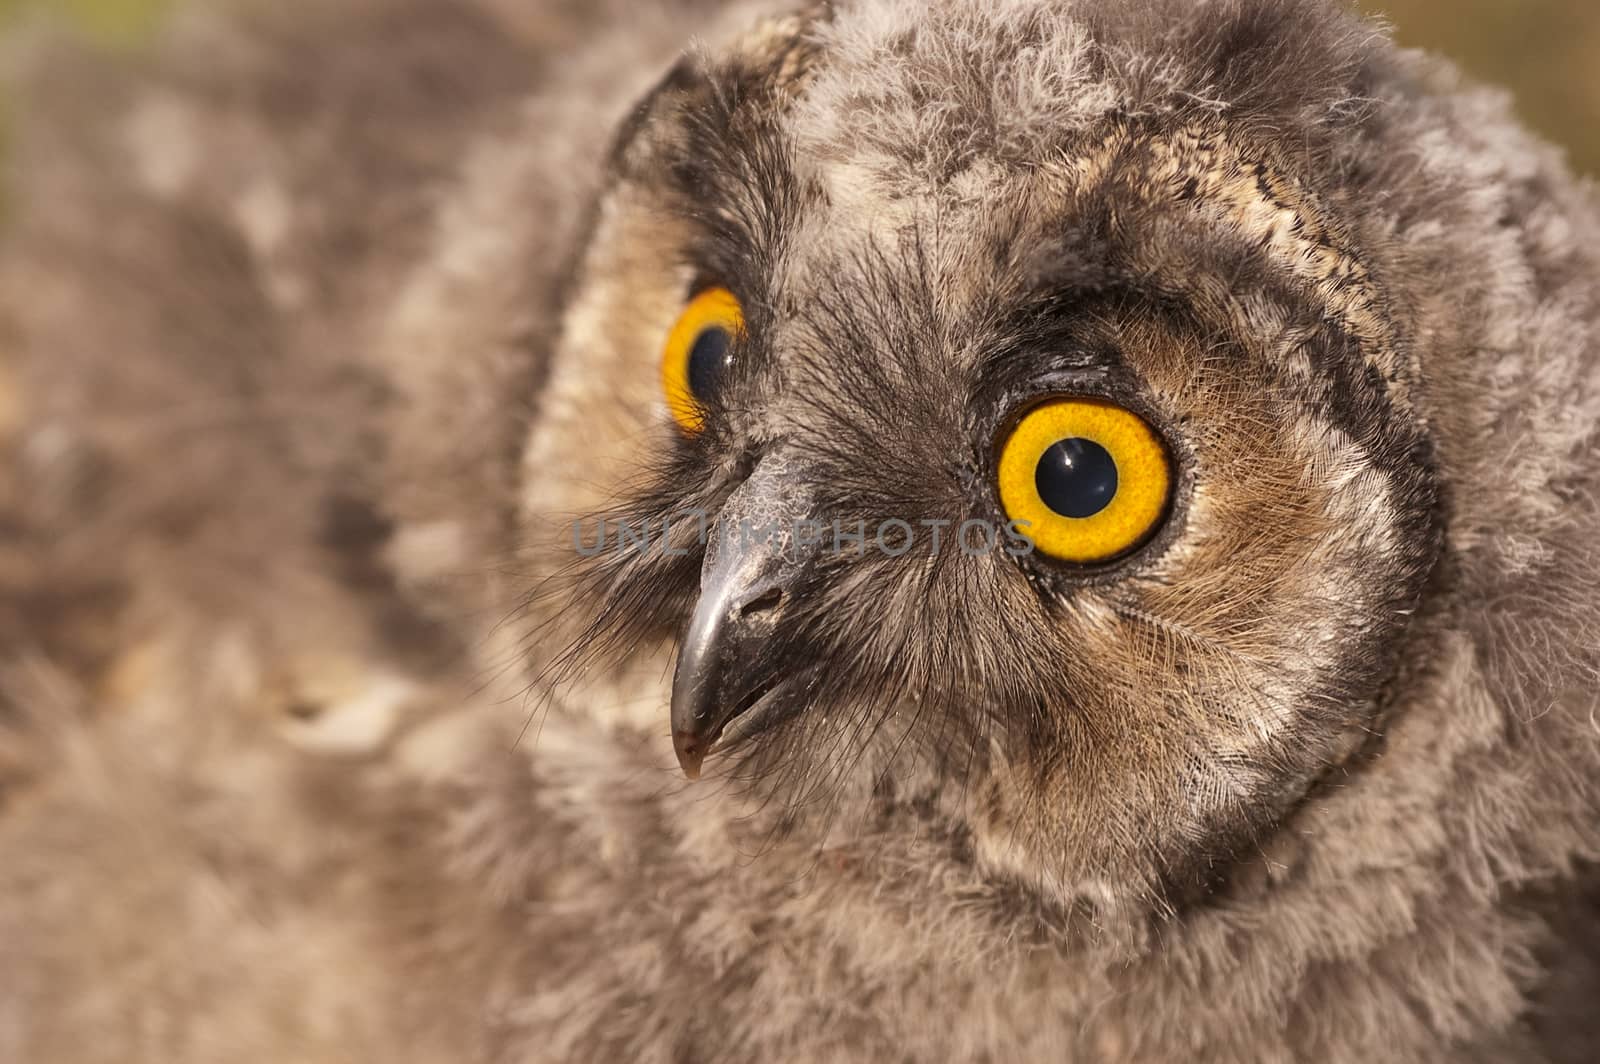 Long-eared owl, young (Asio otus), portrait  by jalonsohu@gmail.com